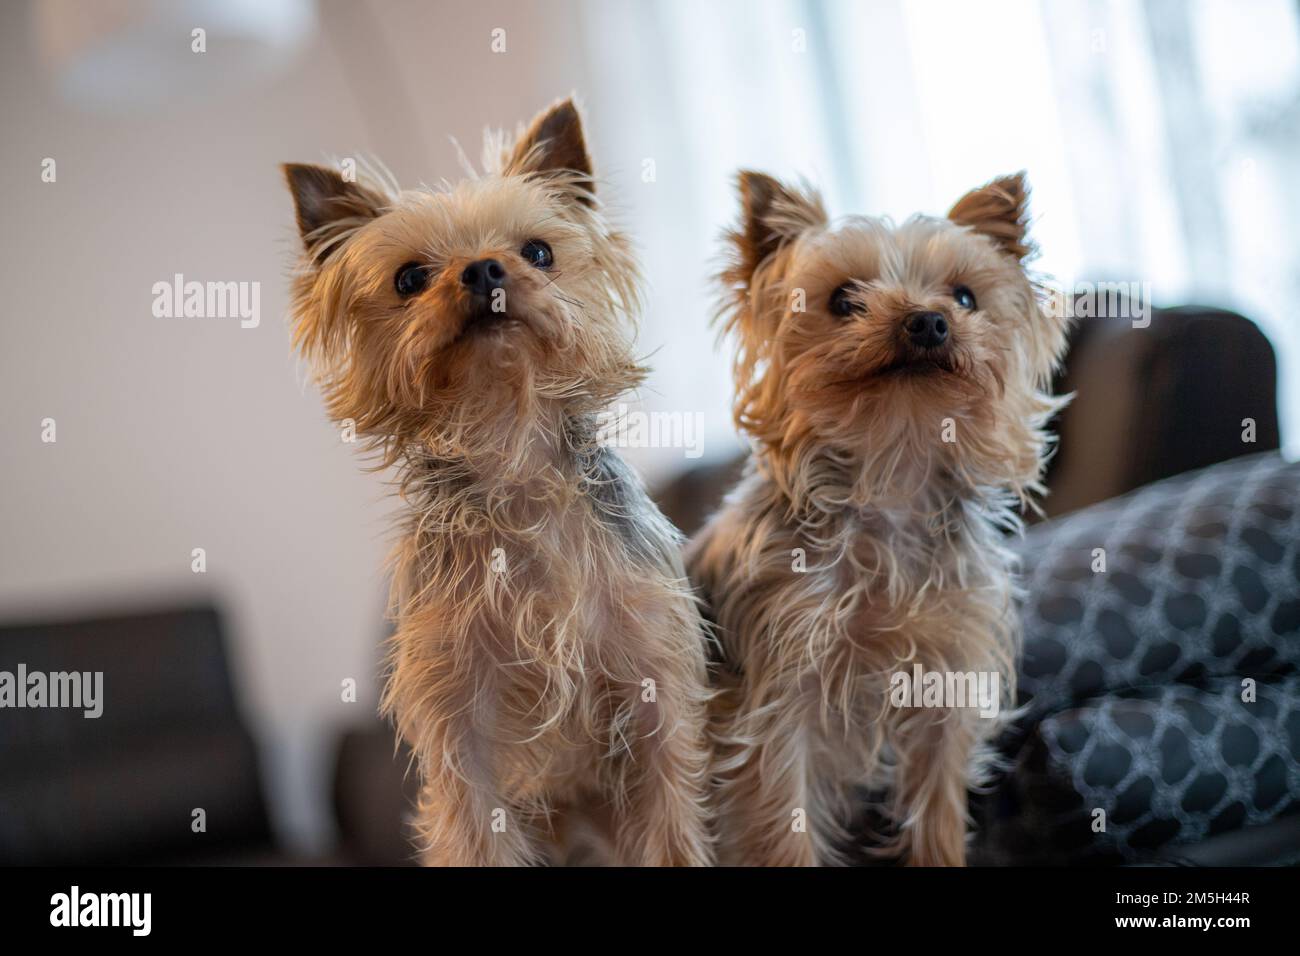 close-up of 2 Yorkshir terriers sitting together on a couch. High quality photo Stock Photo